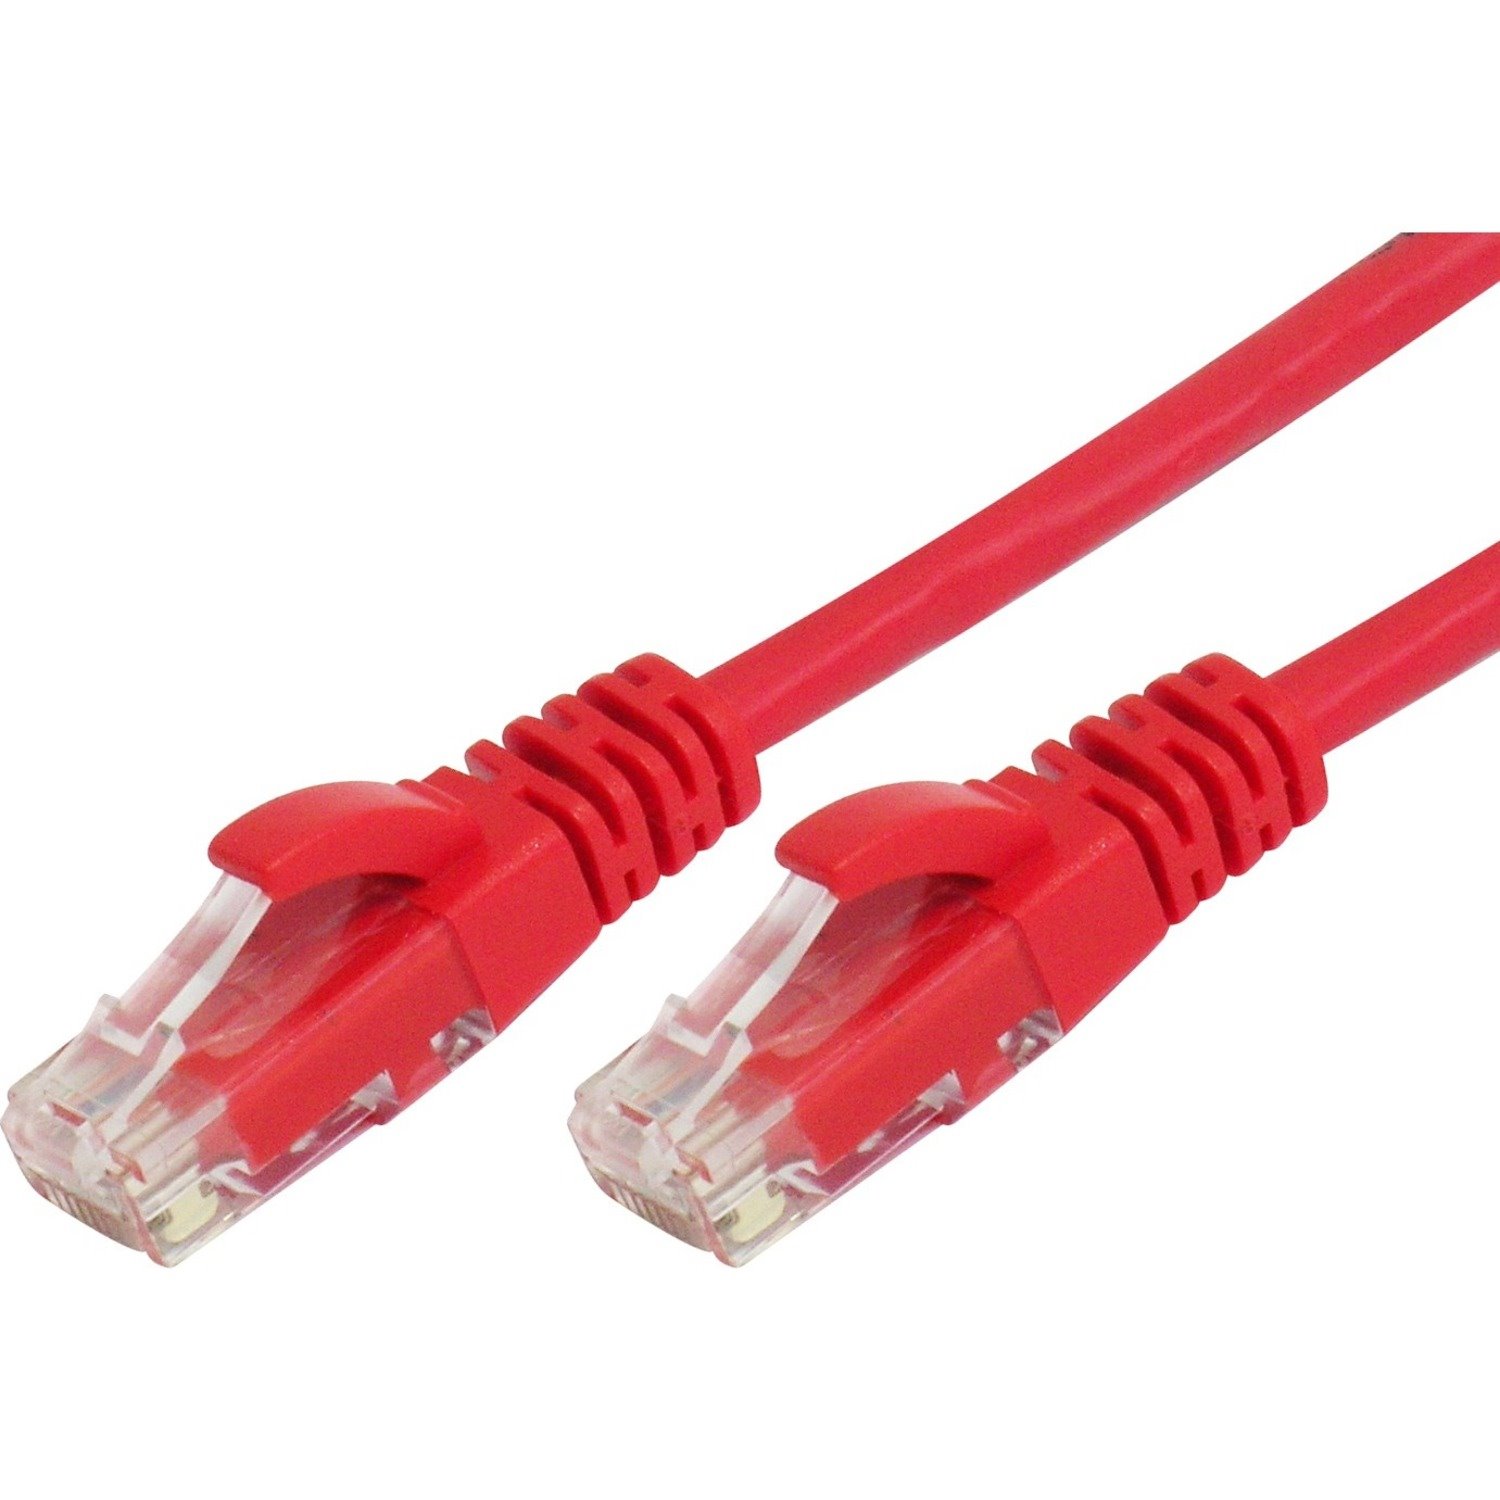 Comsol 2 m Category 6 Network Cable for Switch, Storage Device, Router, Modem, Host Bus Adapter, Patch Panel, Network Device